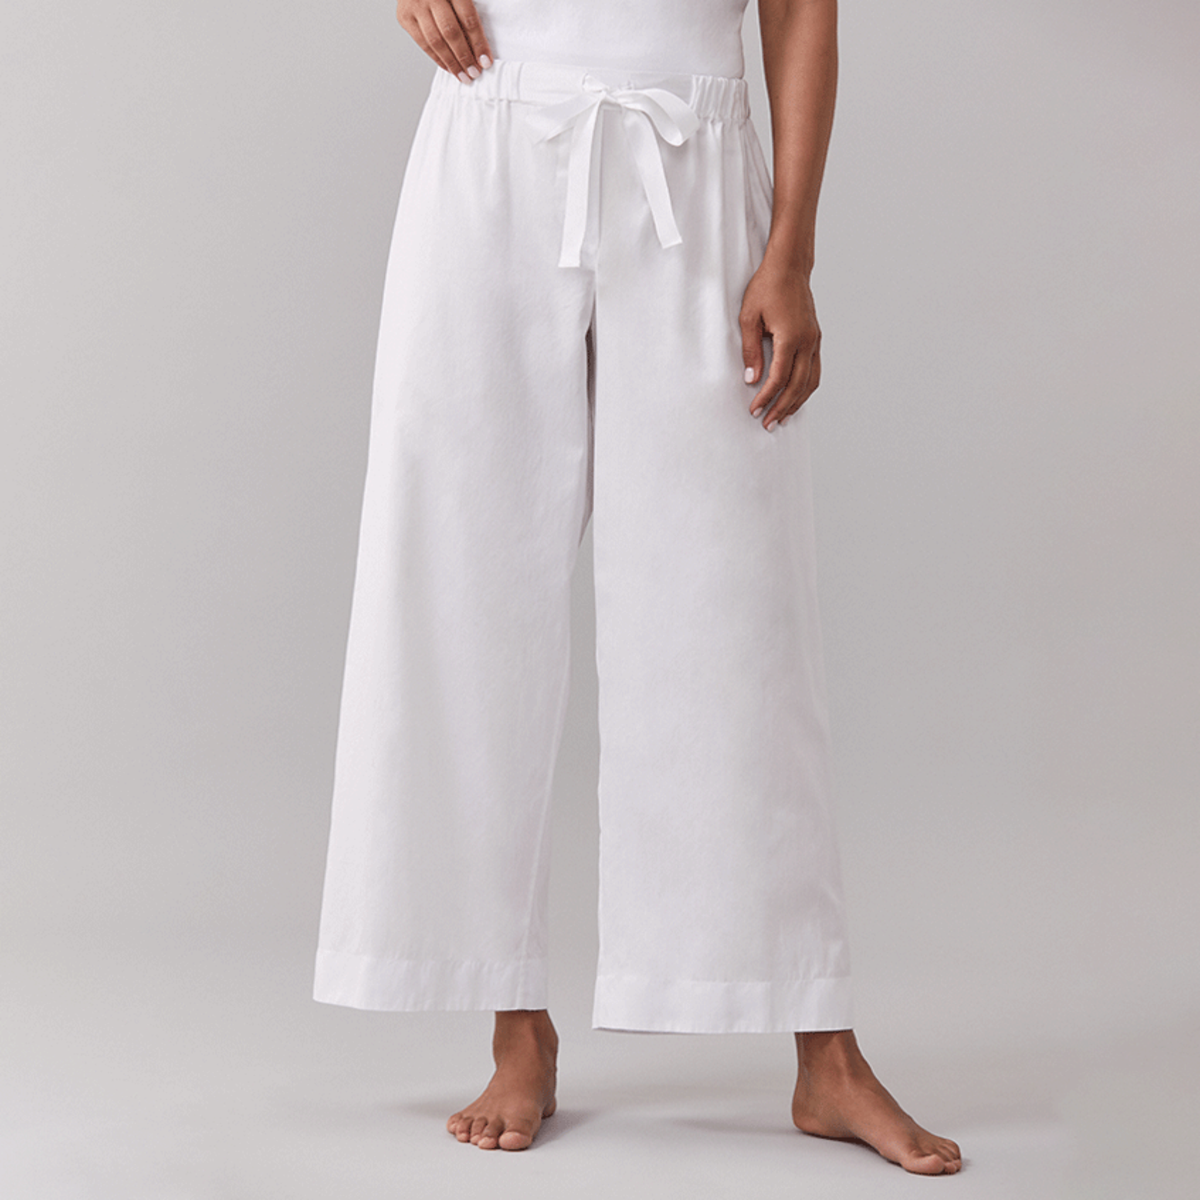 White Sferra Caricia Pant Worn by a Woman Model